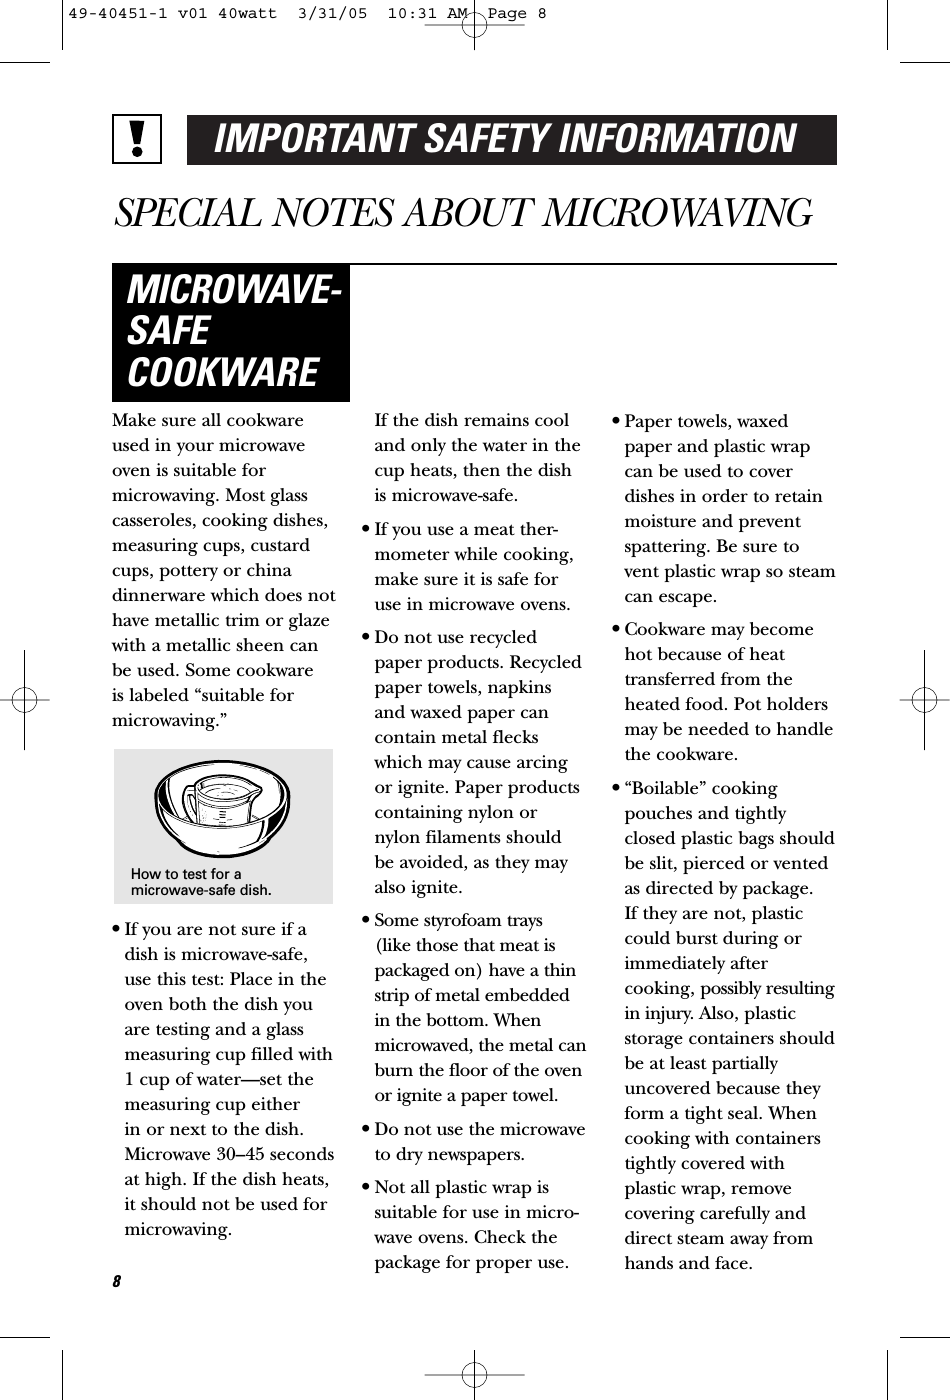 IMPORTANT SAFETY INFORMATIONSPECIAL NOTES ABOUT MICROWAVINGMake sure all cookwareused in your microwaveoven is suitable formicrowaving. Most glasscasseroles, cooking dishes,measuring cups, custardcups, pottery or chinadinnerware which does nothave metallic trim or glazewith a metallic sheen canbe used. Some cookware is labeled “suitable formicrowaving.”•If you are not sure if adish is microwave-safe,use this test: Place in theoven both the dish youare testing and a glassmeasuring cup filled with1 cup of water—set themeasuring cup either in or next to the dish.Microwave 30–45 secondsat high. If the dish heats,it should not be used formicrowaving. If the dish remains cooland only the water in thecup heats, then the dishis microwave-safe.•If you use a meat ther-mometer while cooking,make sure it is safe foruse in microwave ovens.•Do not use recycledpaper products. Recycledpaper towels, napkinsand waxed paper cancontain metal fleckswhich may cause arcingor ignite. Paper productscontaining nylon ornylon filaments shouldbe avoided, as they mayalso ignite. •Some styrofoam trays (like those that meat ispackaged on) have a thinstrip of metal embeddedin the bottom. Whenmicrowaved, the metal canburn the floor of the ovenor ignite a paper towel.•Do not use the microwaveto dry newspapers.•Not all plastic wrap issuitable for use in micro-wave ovens. Check thepackage for proper use.•Paper towels, waxedpaper and plastic wrapcan be used to coverdishes in order to retainmoisture and preventspattering. Be sure tovent plastic wrap so steamcan escape.•Cookware may becomehot because of heattransferred from theheated food. Pot holdersmay be needed to handlethe cookware.•“Boilable” cookingpouches and tightlyclosed plastic bags shouldbe slit, pierced or ventedas directed by package. If they are not, plasticcould burst during orimmediately aftercooking, possibly resultingin injury. Also, plasticstorage containers shouldbe at least partiallyuncovered because theyform a tight seal. Whencooking with containerstightly covered withplastic wrap, removecovering carefully anddirect steam away fromhands and face.MICROWAVE-SAFECOOKWAREHow to test for amicrowave-safe dish.849-40451-1 v01 40watt  3/31/05  10:31 AM  Page 8